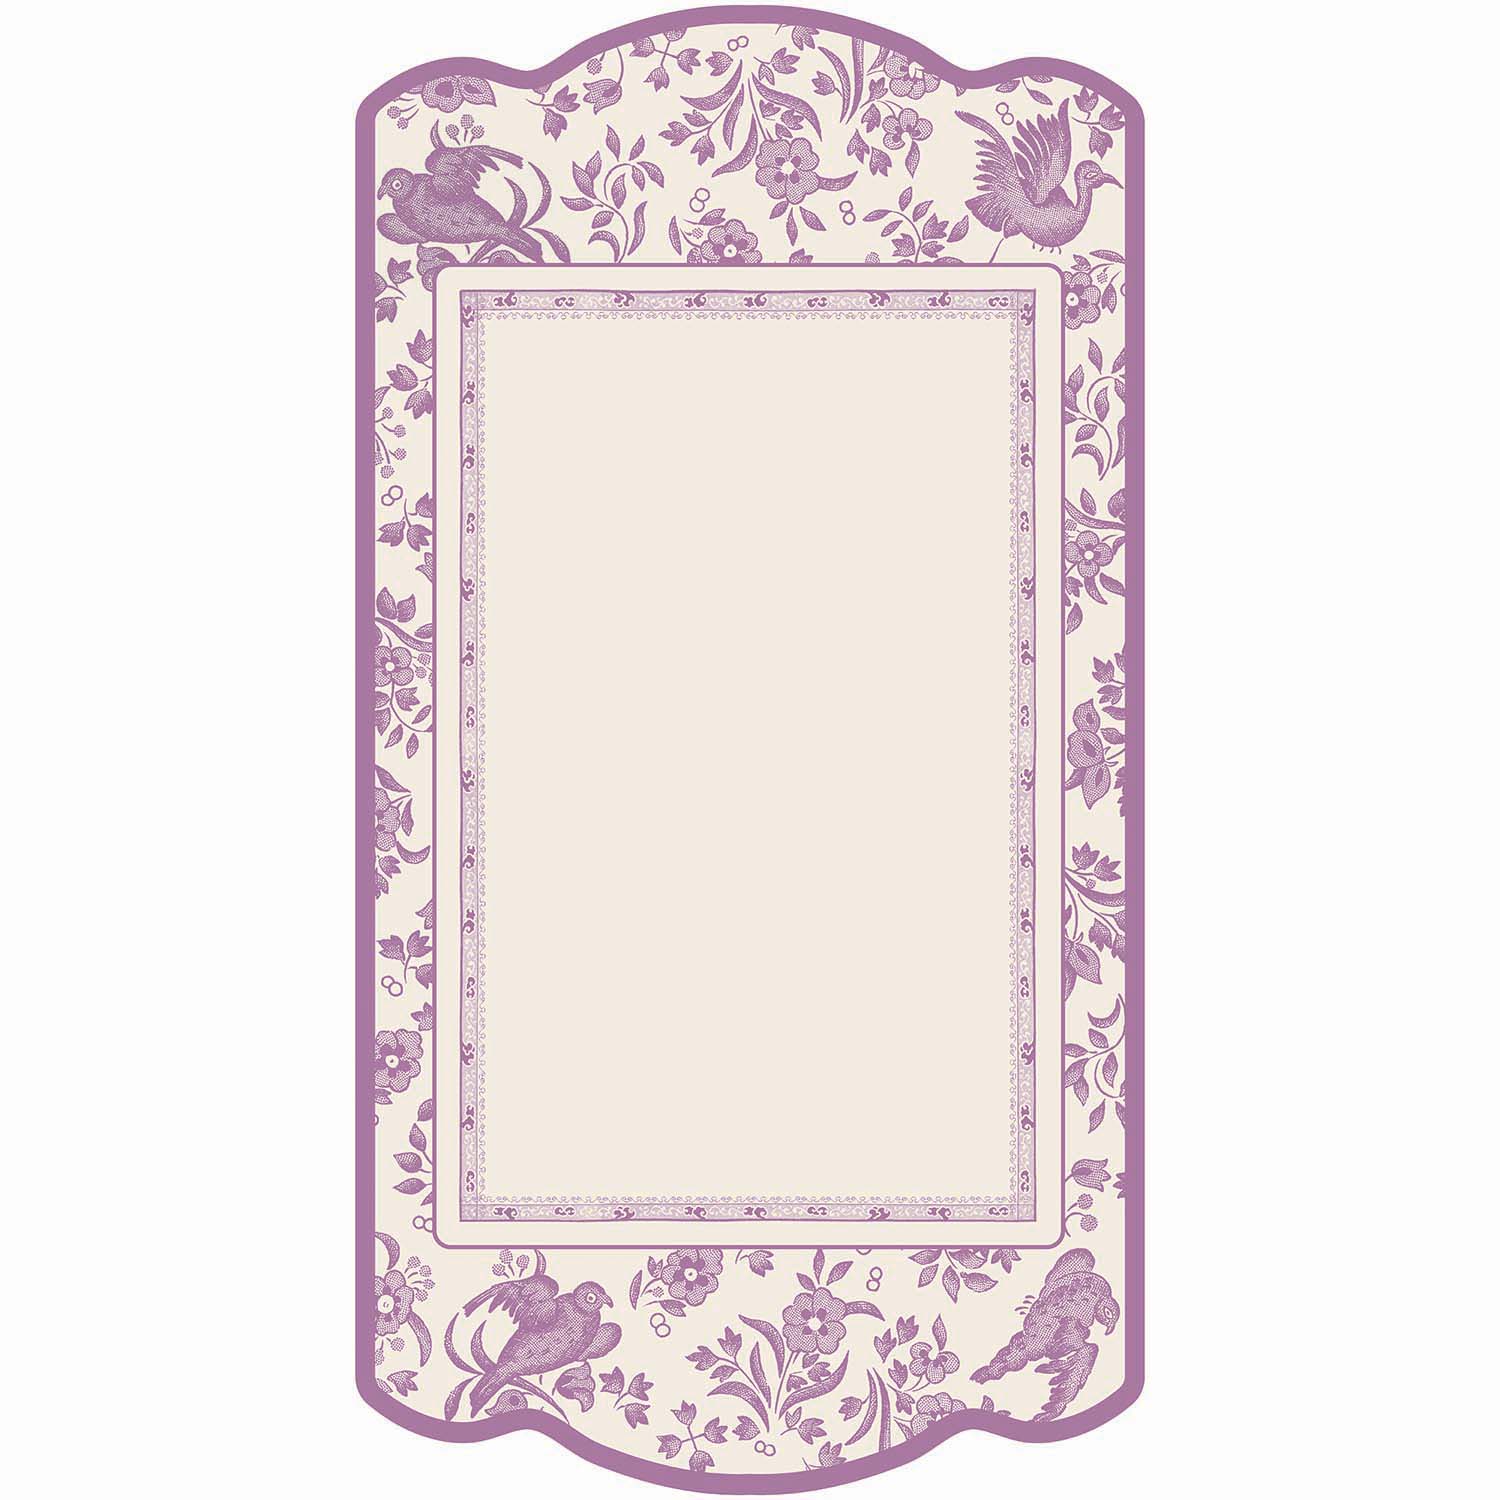 A Lilac Regal Peacock Table Card with a floral design by Hester &amp; Cook.